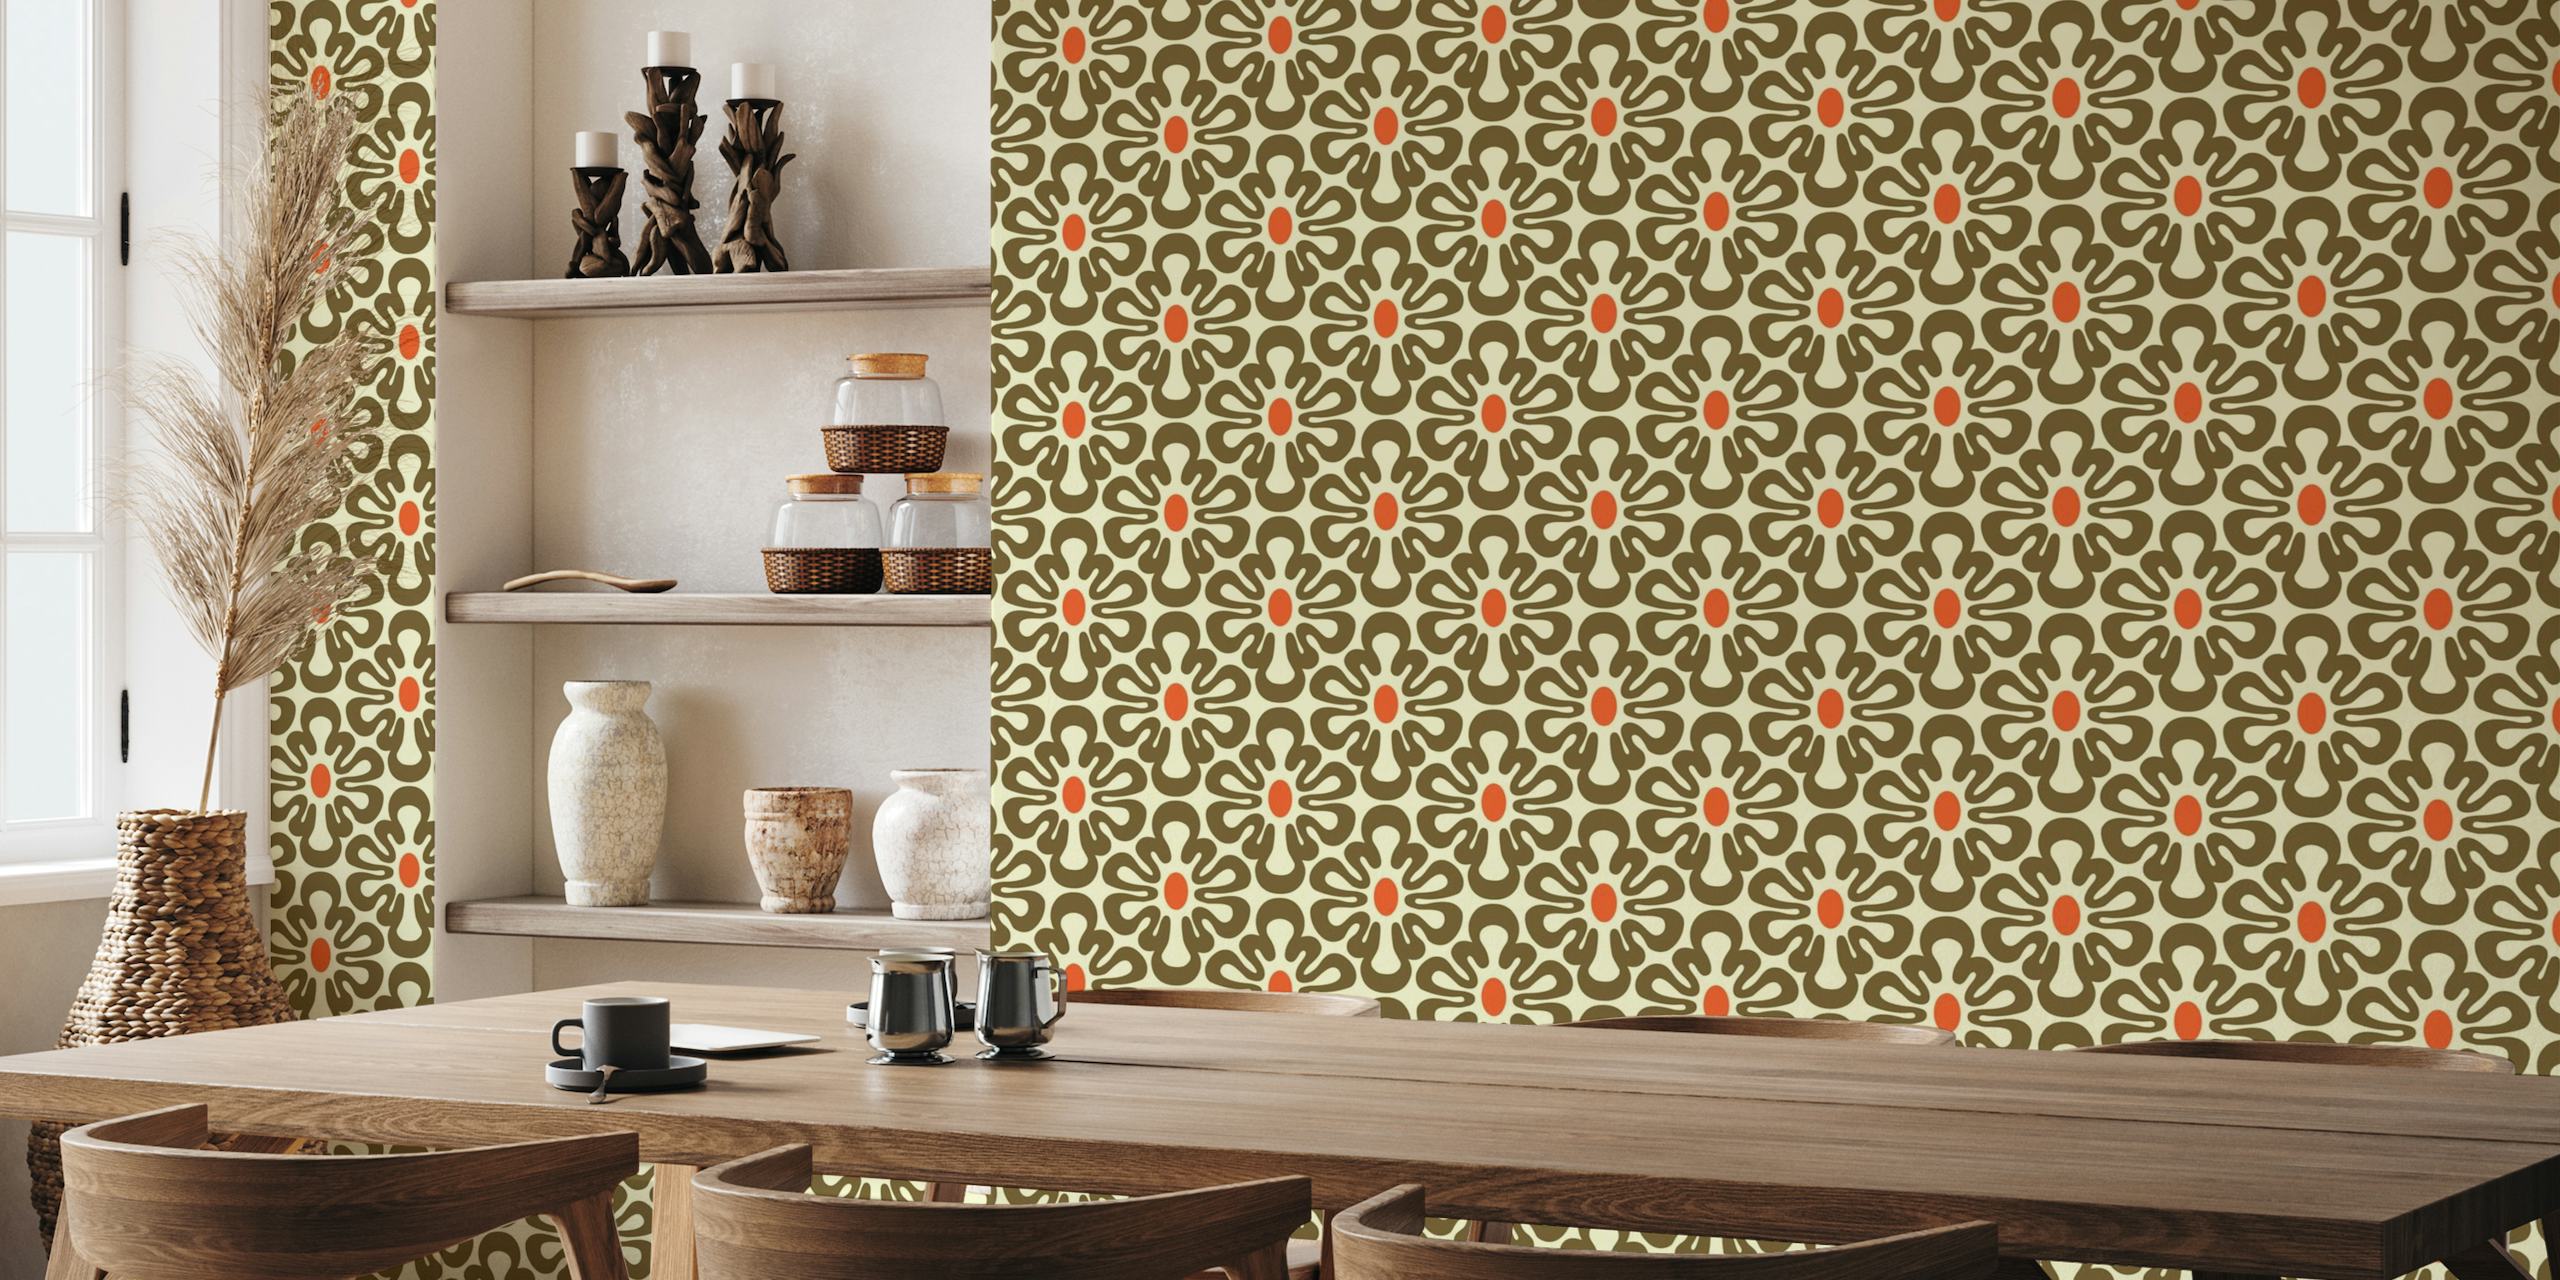 2625 A - abstract retro shapes pattern behang